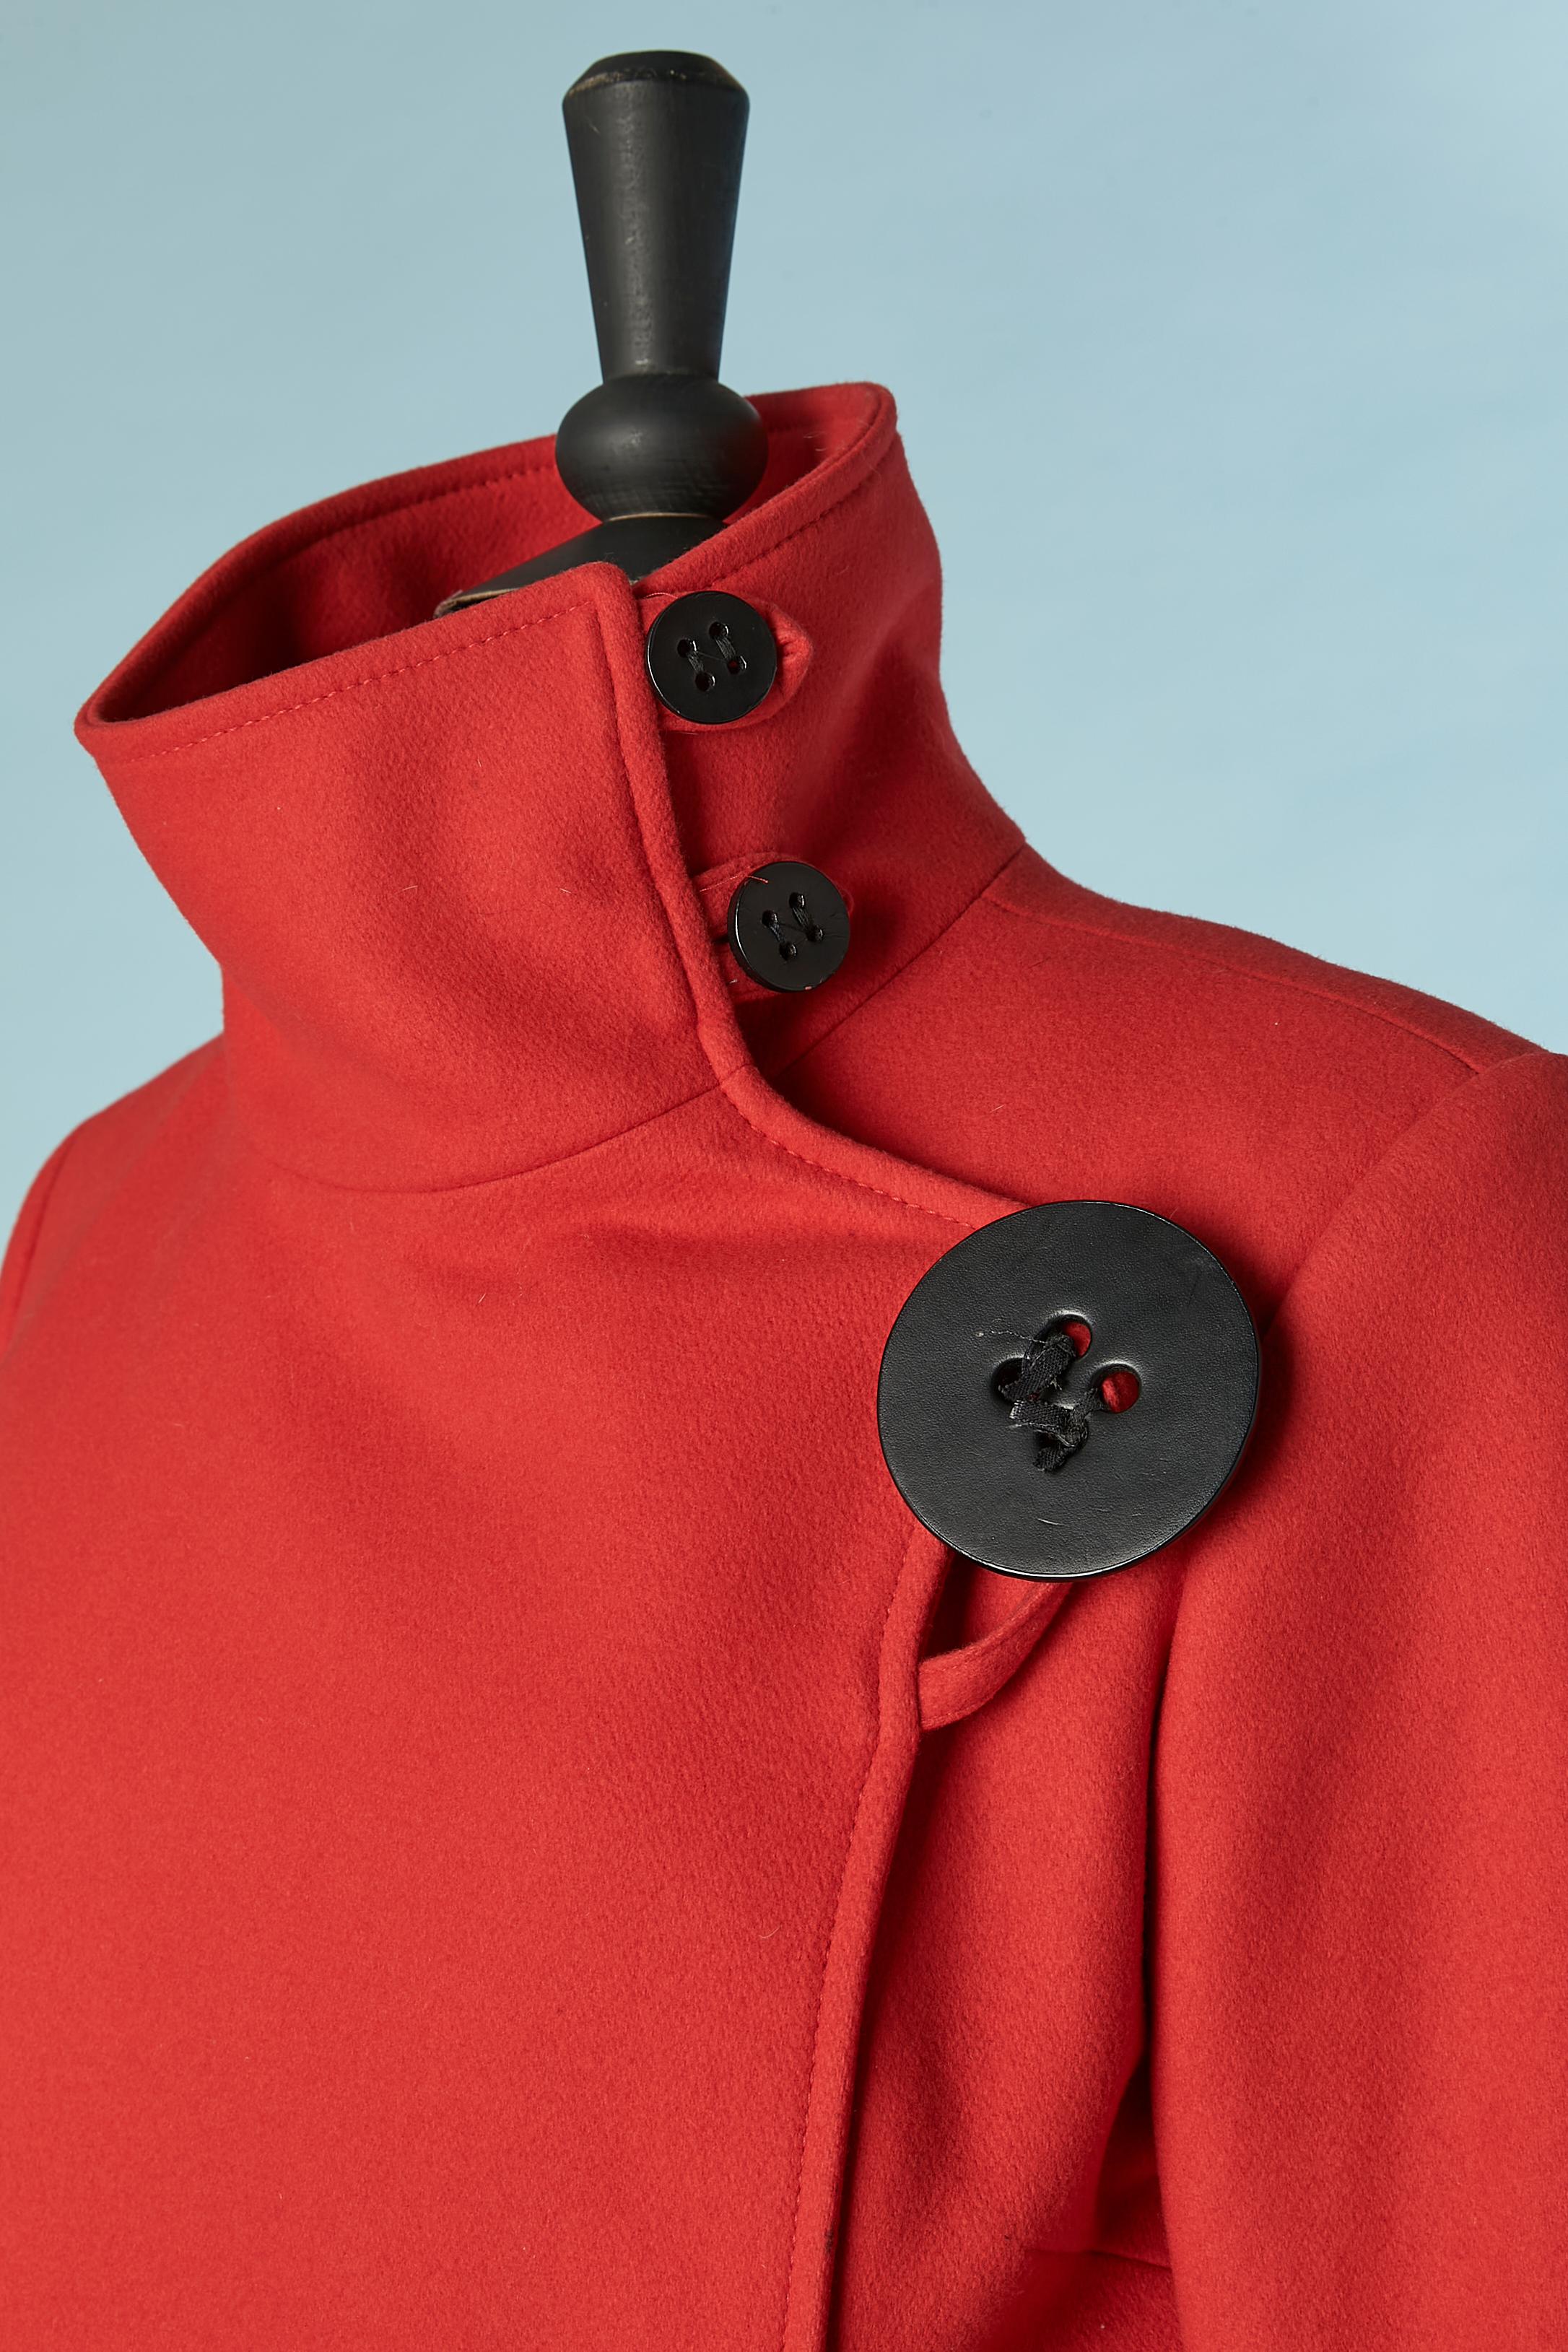 Red and black wool coat with one oversize button and 2 small buttons closure. Main fabric composition: 85% wool, 15% nylon. Lining: 100% rayon. 
Shoulder pad. Pocket on both side. 
SIZE 40 (Fr) 10 (US) L 